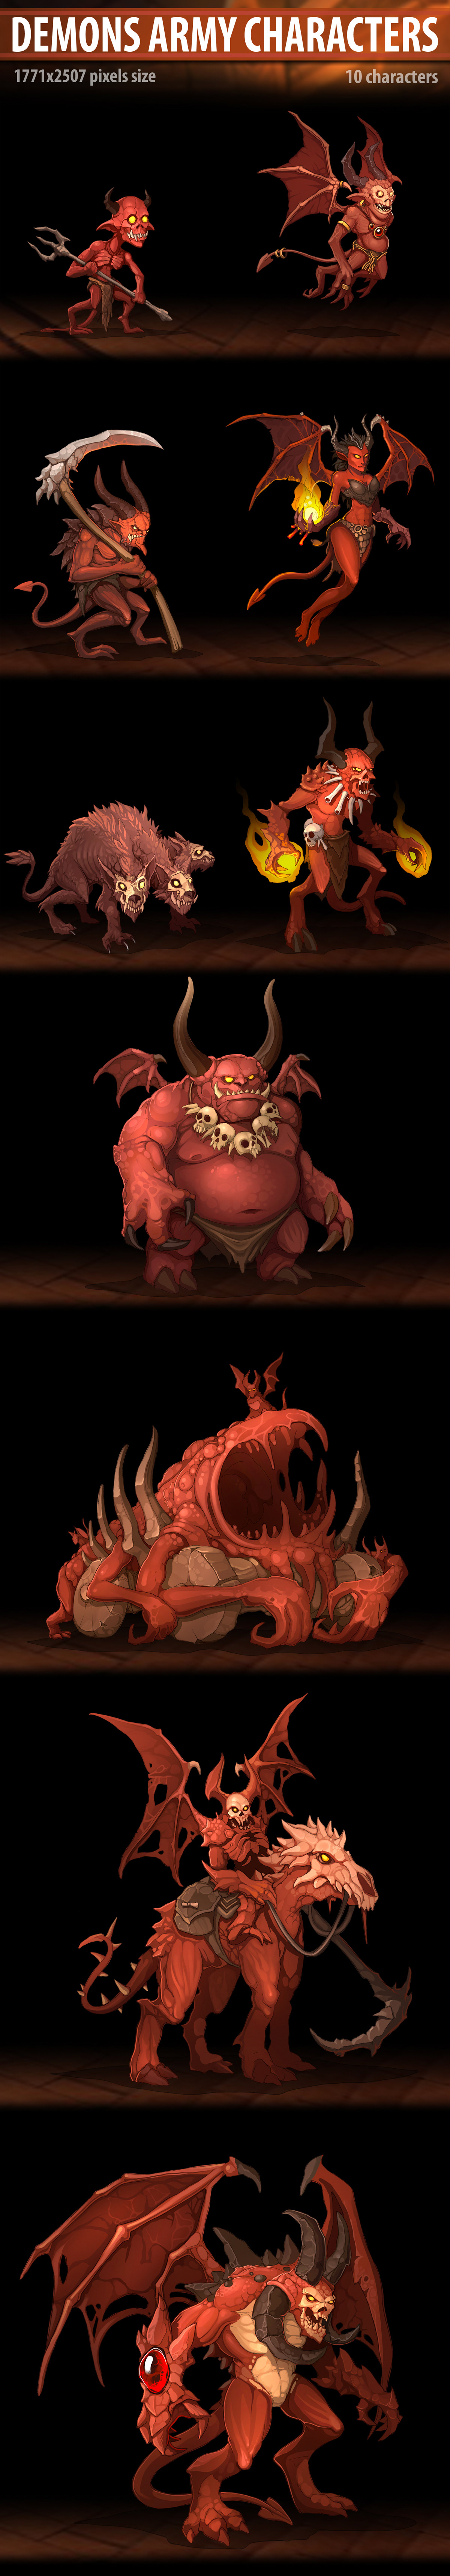 army characters demon diablo fantasy hell imp INFERNO mmo rpg